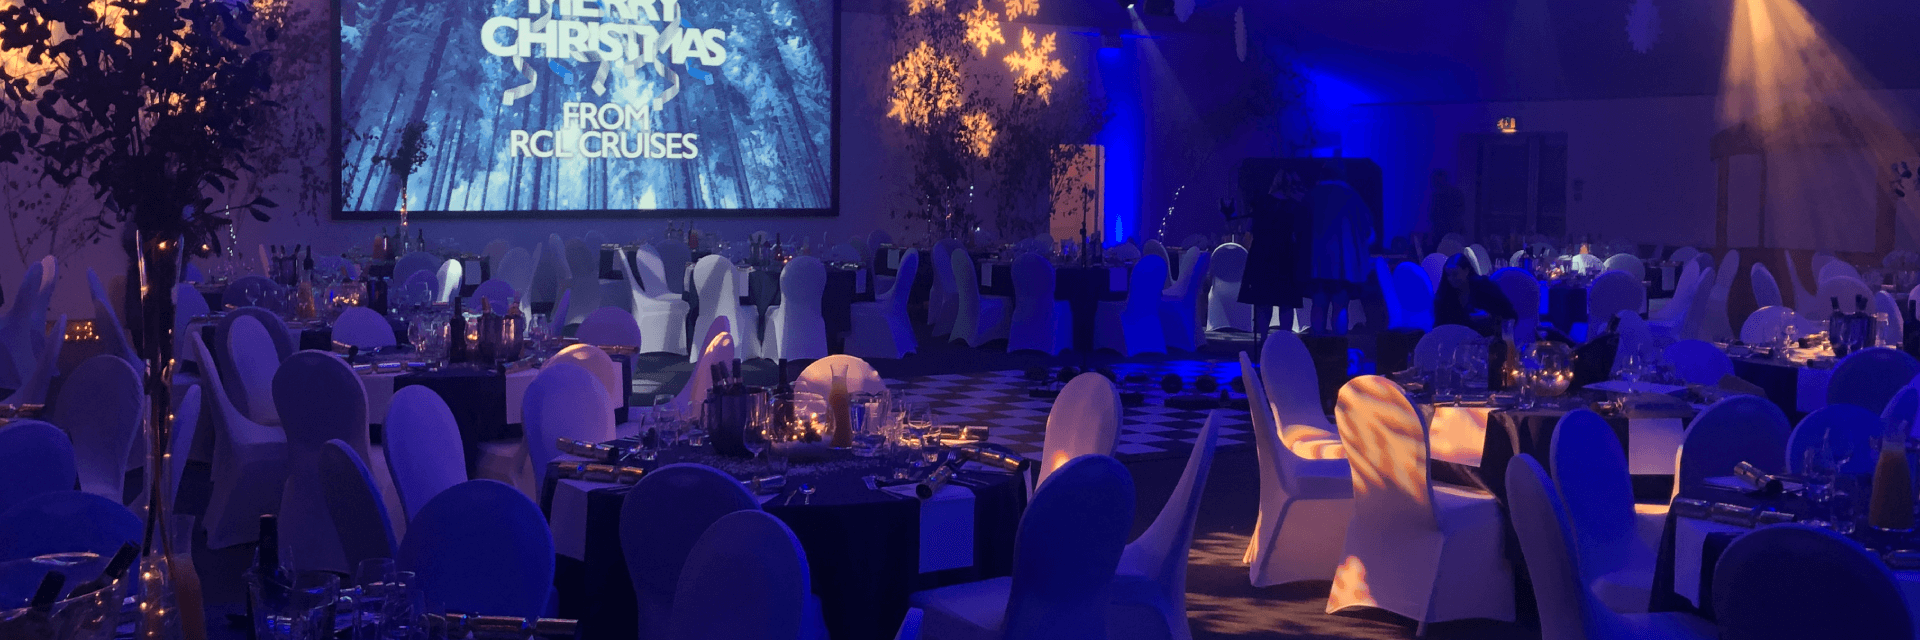 Winter Events Location, Christmas Decorated Venue